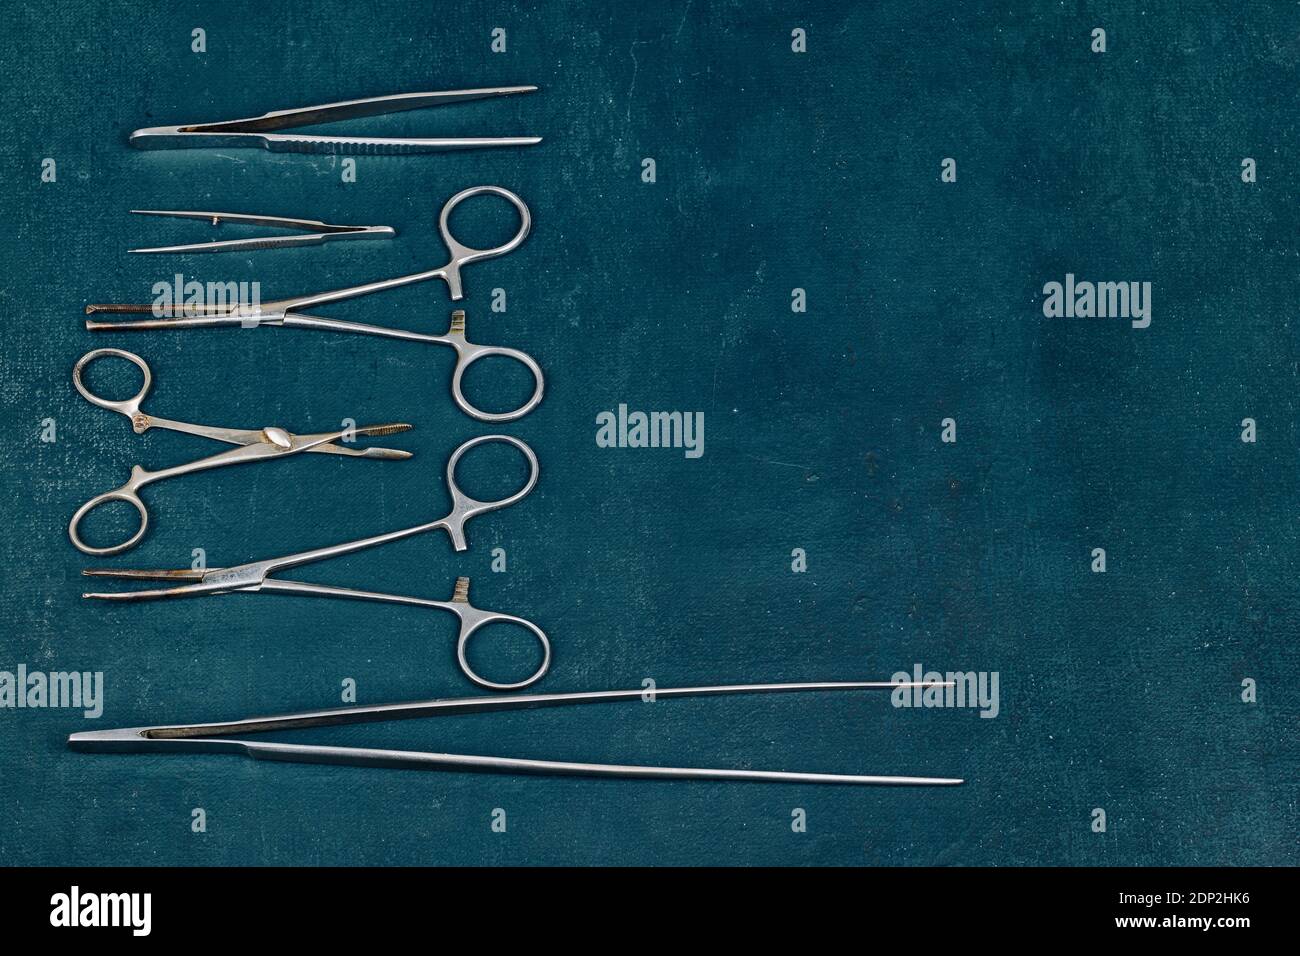 Old, rusty, used surgical instruments on a blue background, close up Stock Photo